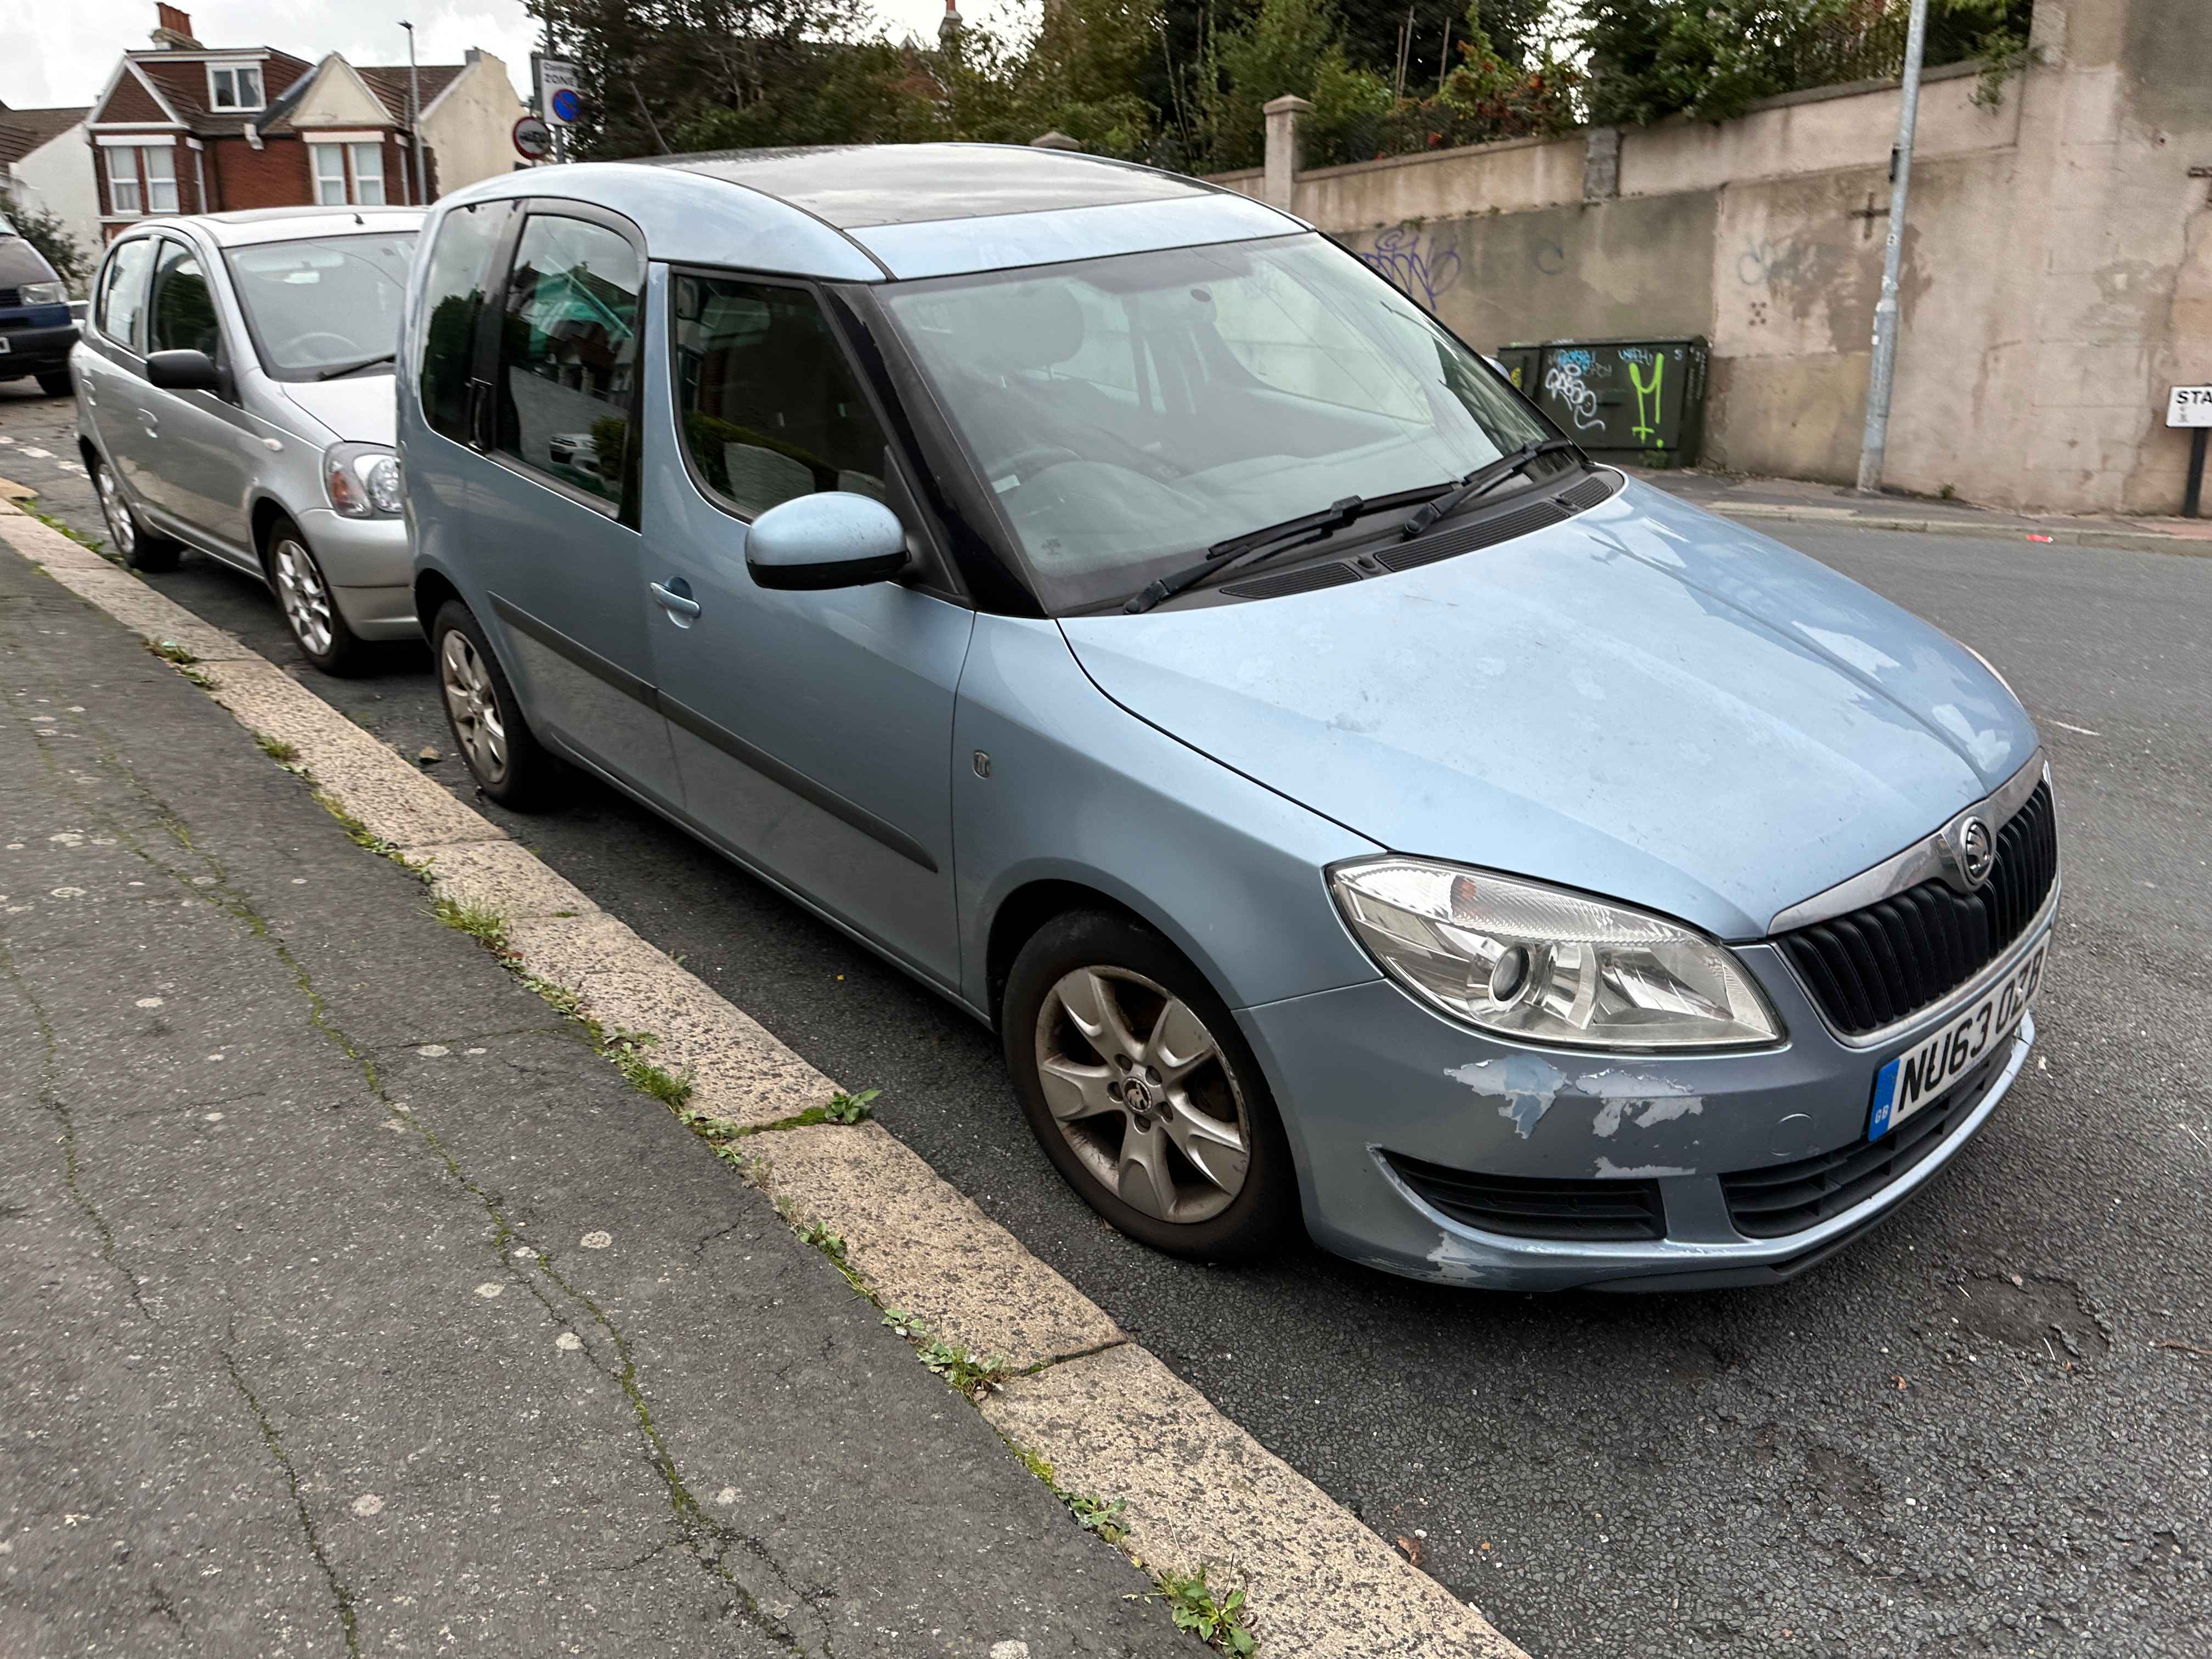 Photograph of NU63 OZB - a Blue Skoda Roomster parked in Hollingdean by a non-resident. The ninth of nineteen photographs supplied by the residents of Hollingdean.